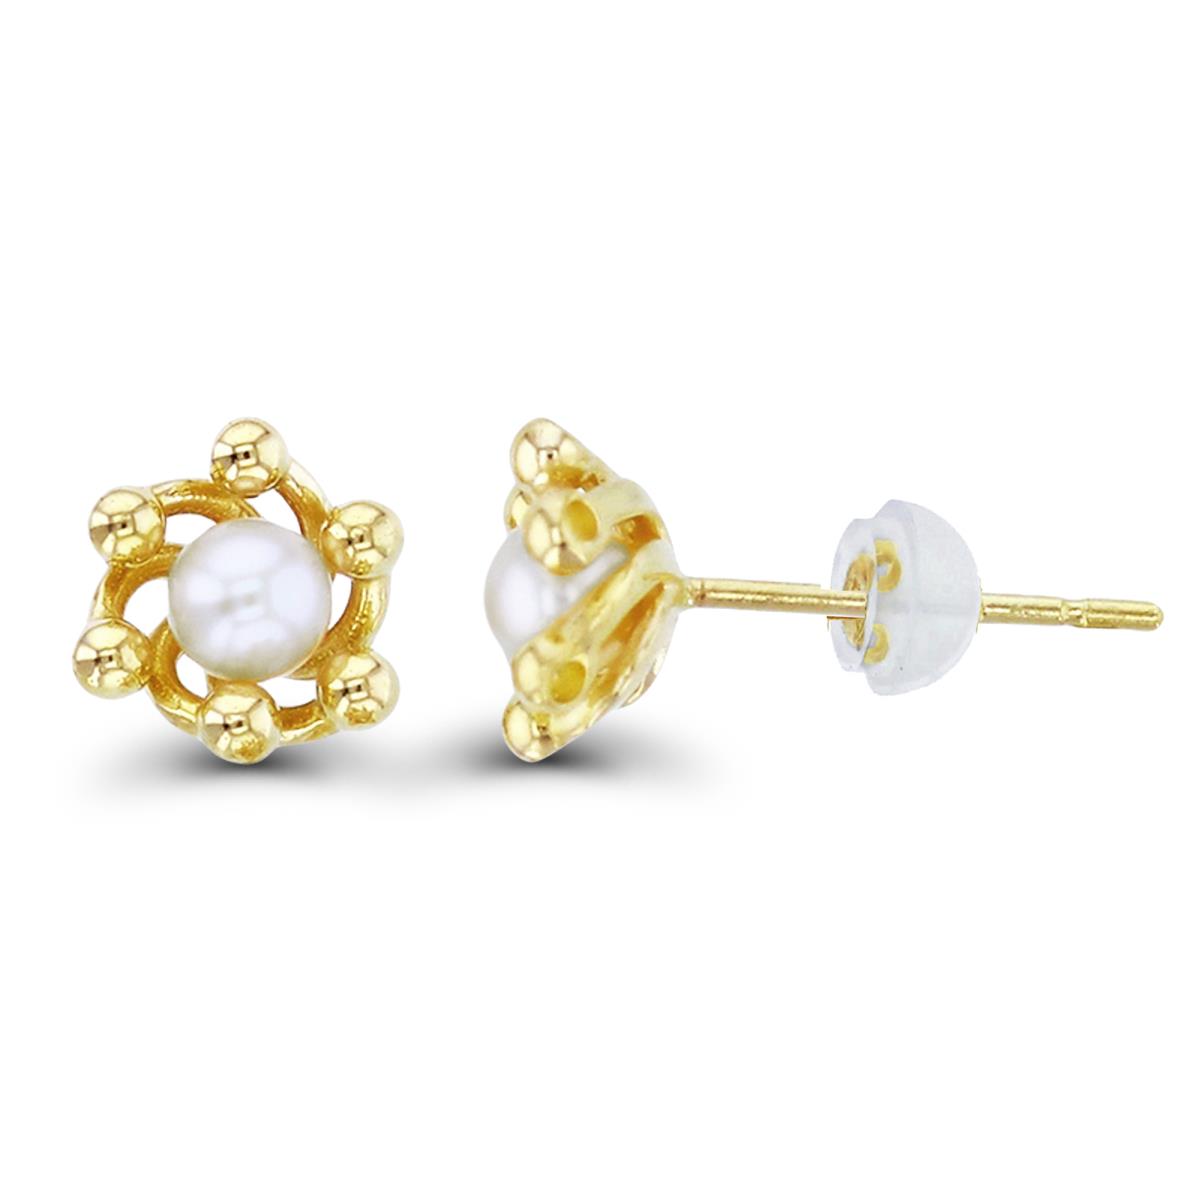 10K Yellow Gold 3mm Rnd Pearl Flower Beaded Studs with Silicon Backs